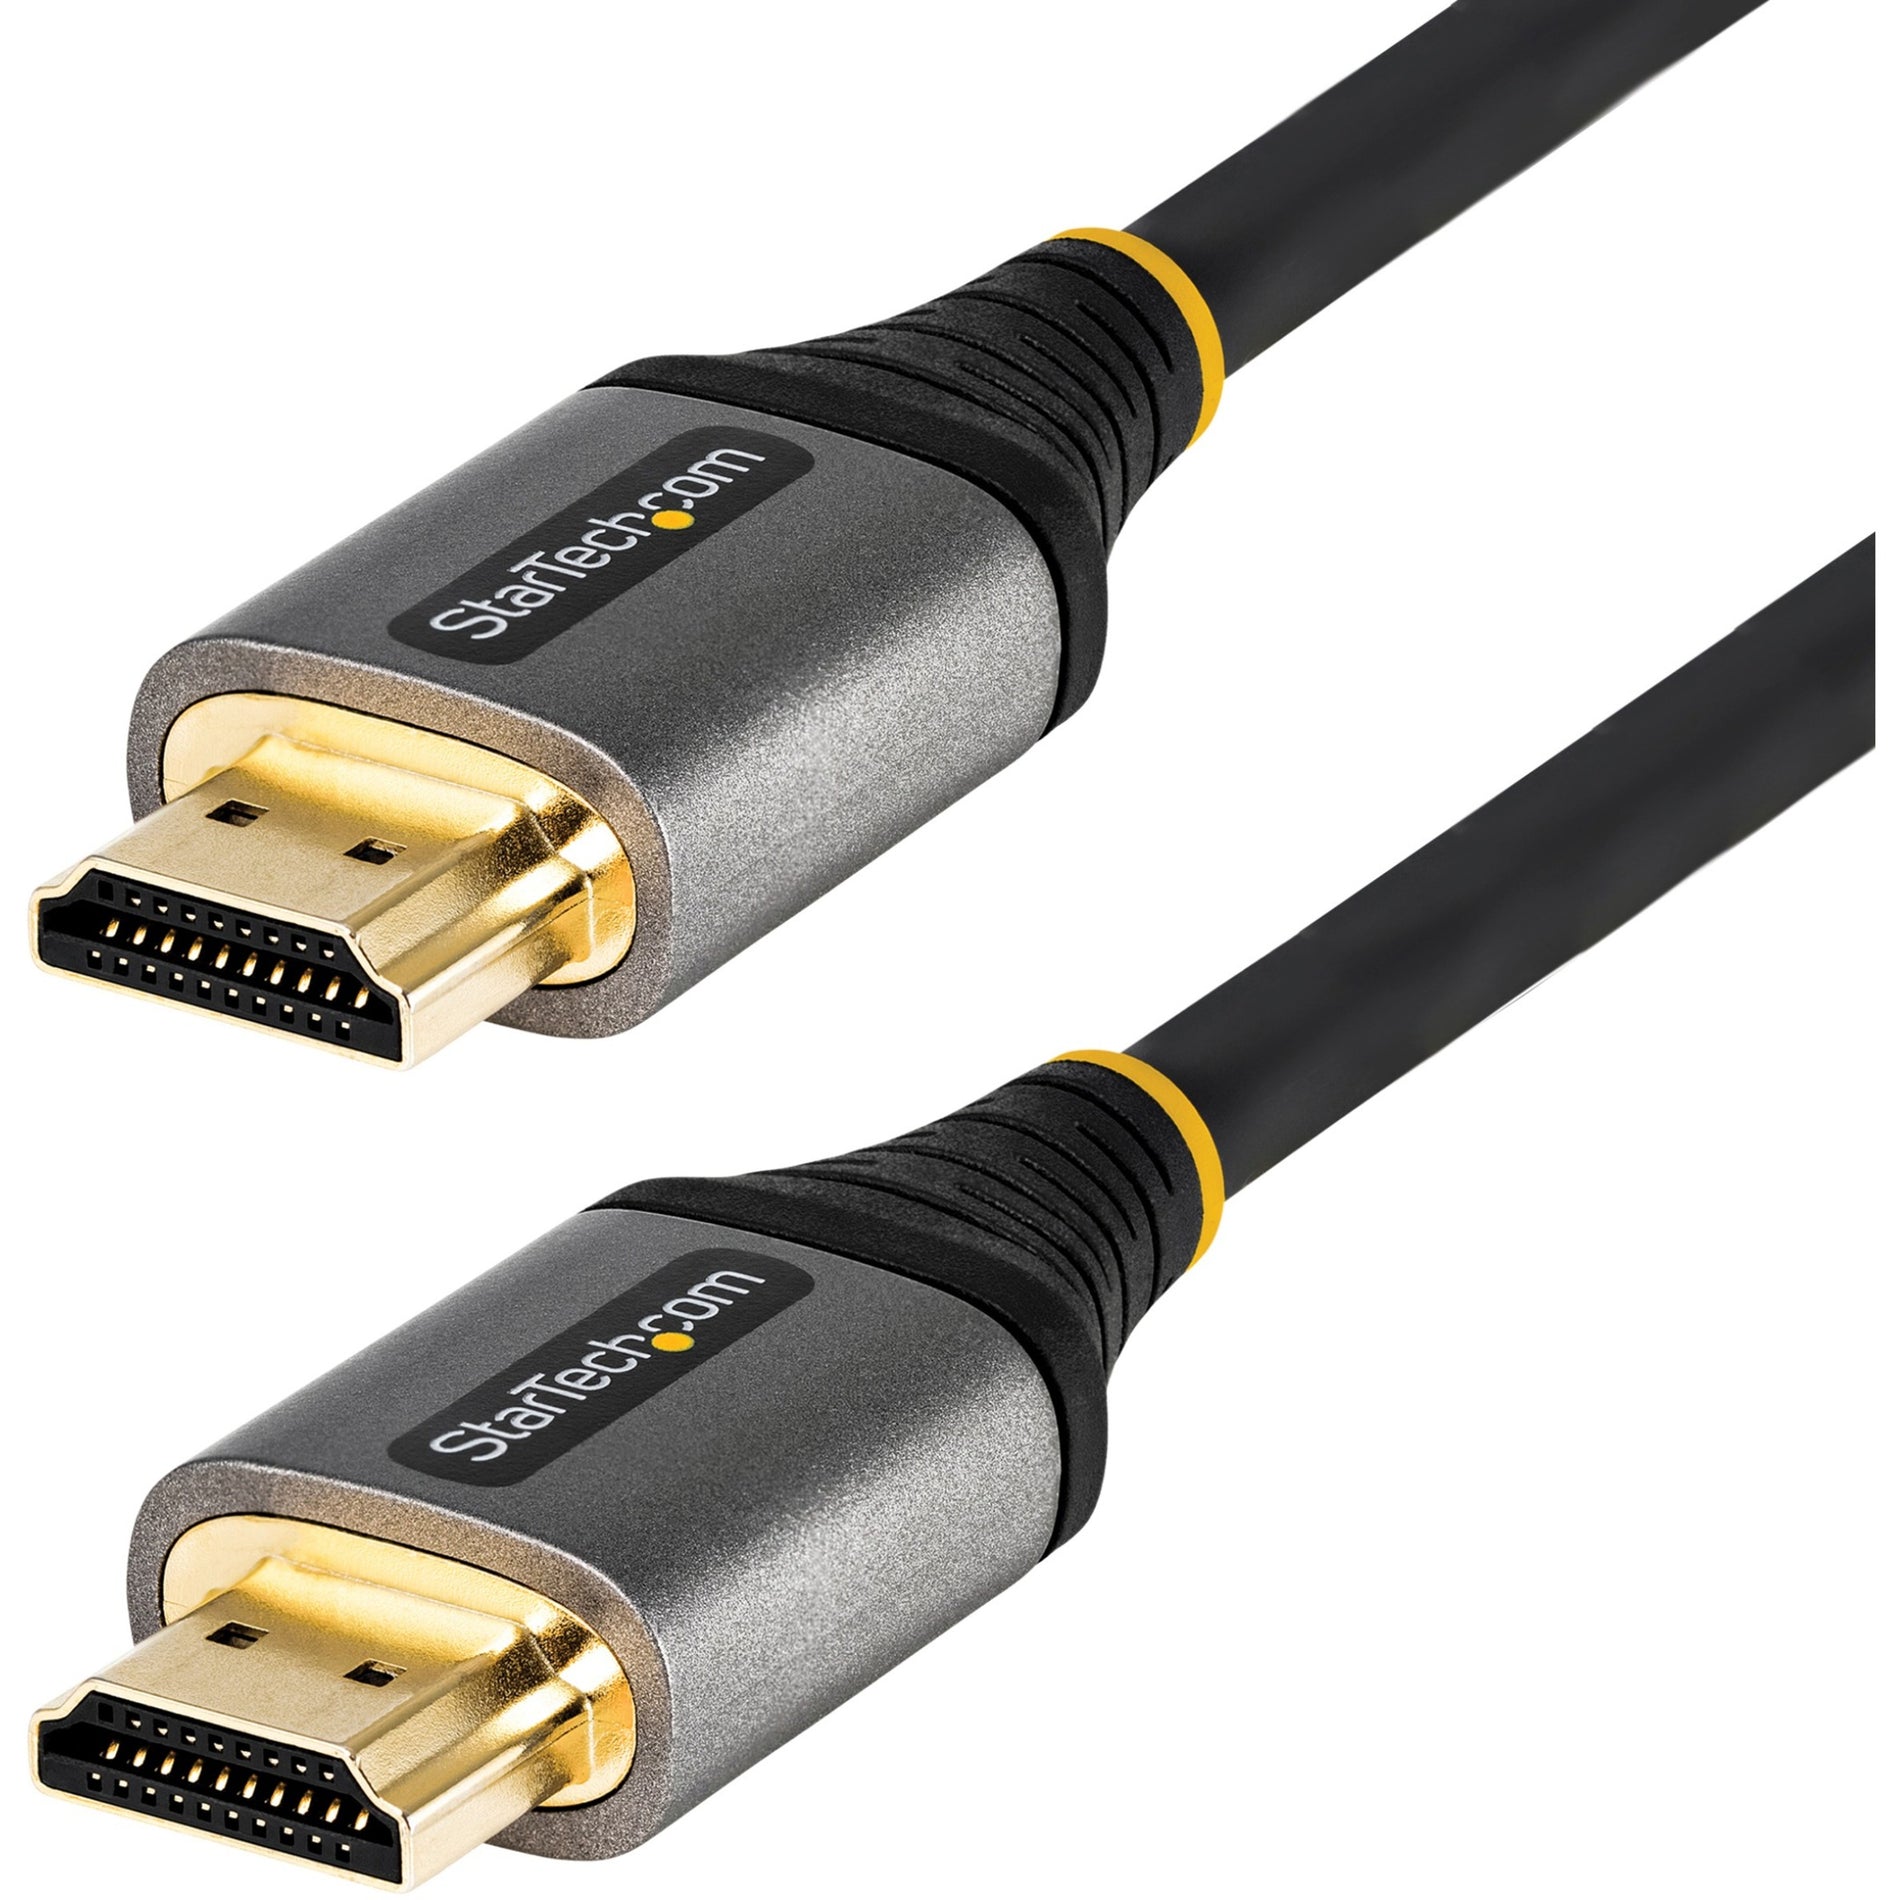 StarTech.com HDMM21V3M Ultra High Speed HDMI Cable, 10ft/3m, Certified 8K 60Hz/4K 120Hz HDR10+, Monitor/Display